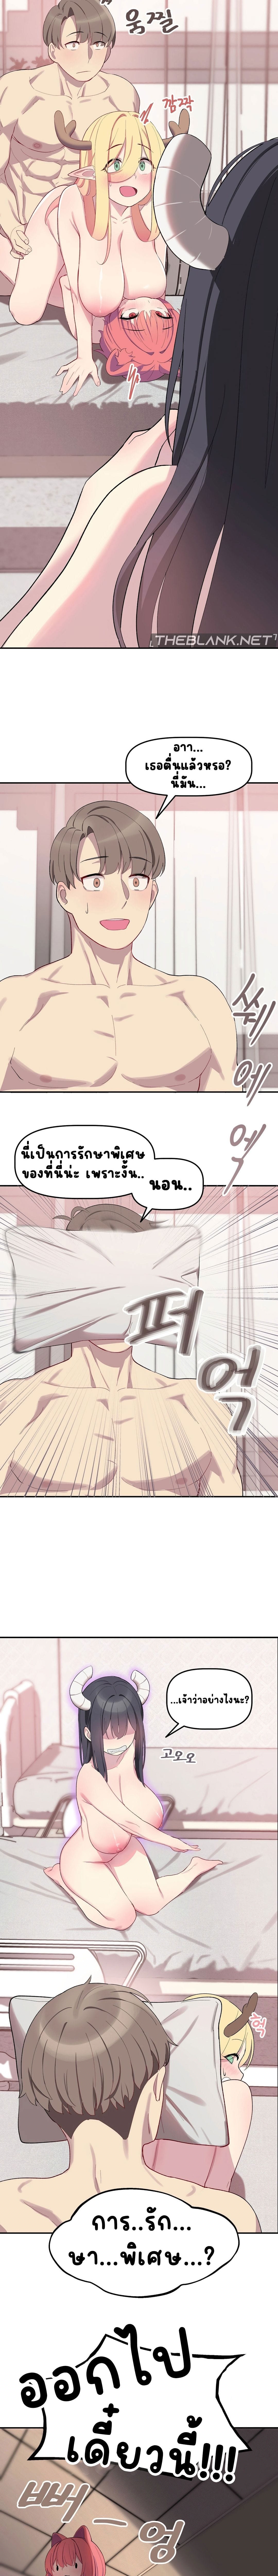 Hospitalized Life in Another World ตอนที่ 4 ภาพ 14